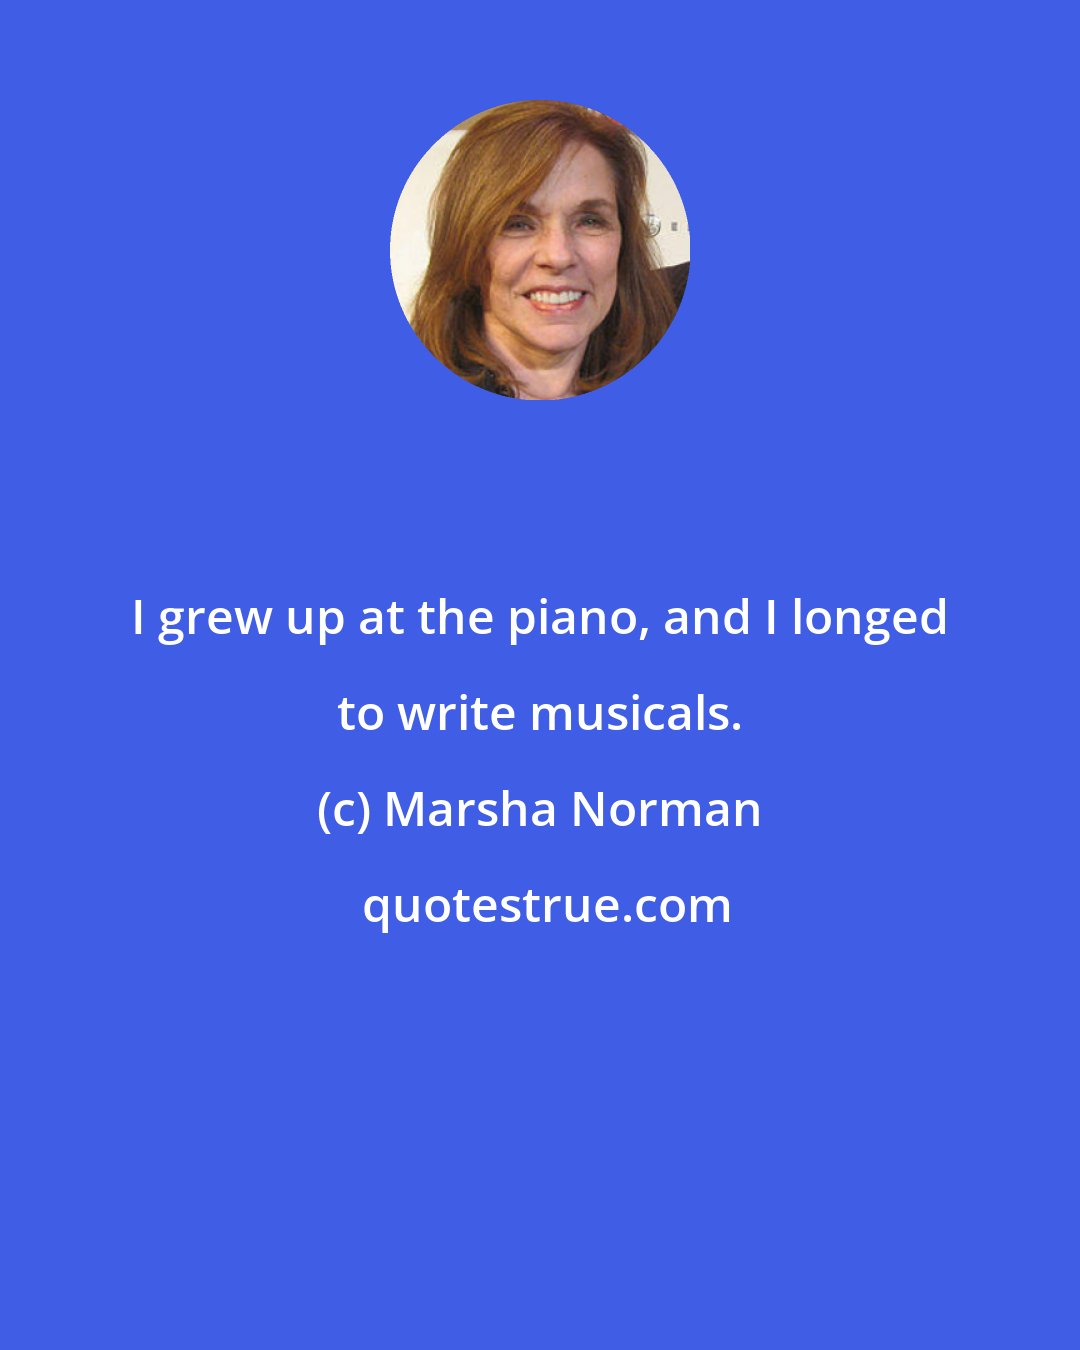 Marsha Norman: I grew up at the piano, and I longed to write musicals.